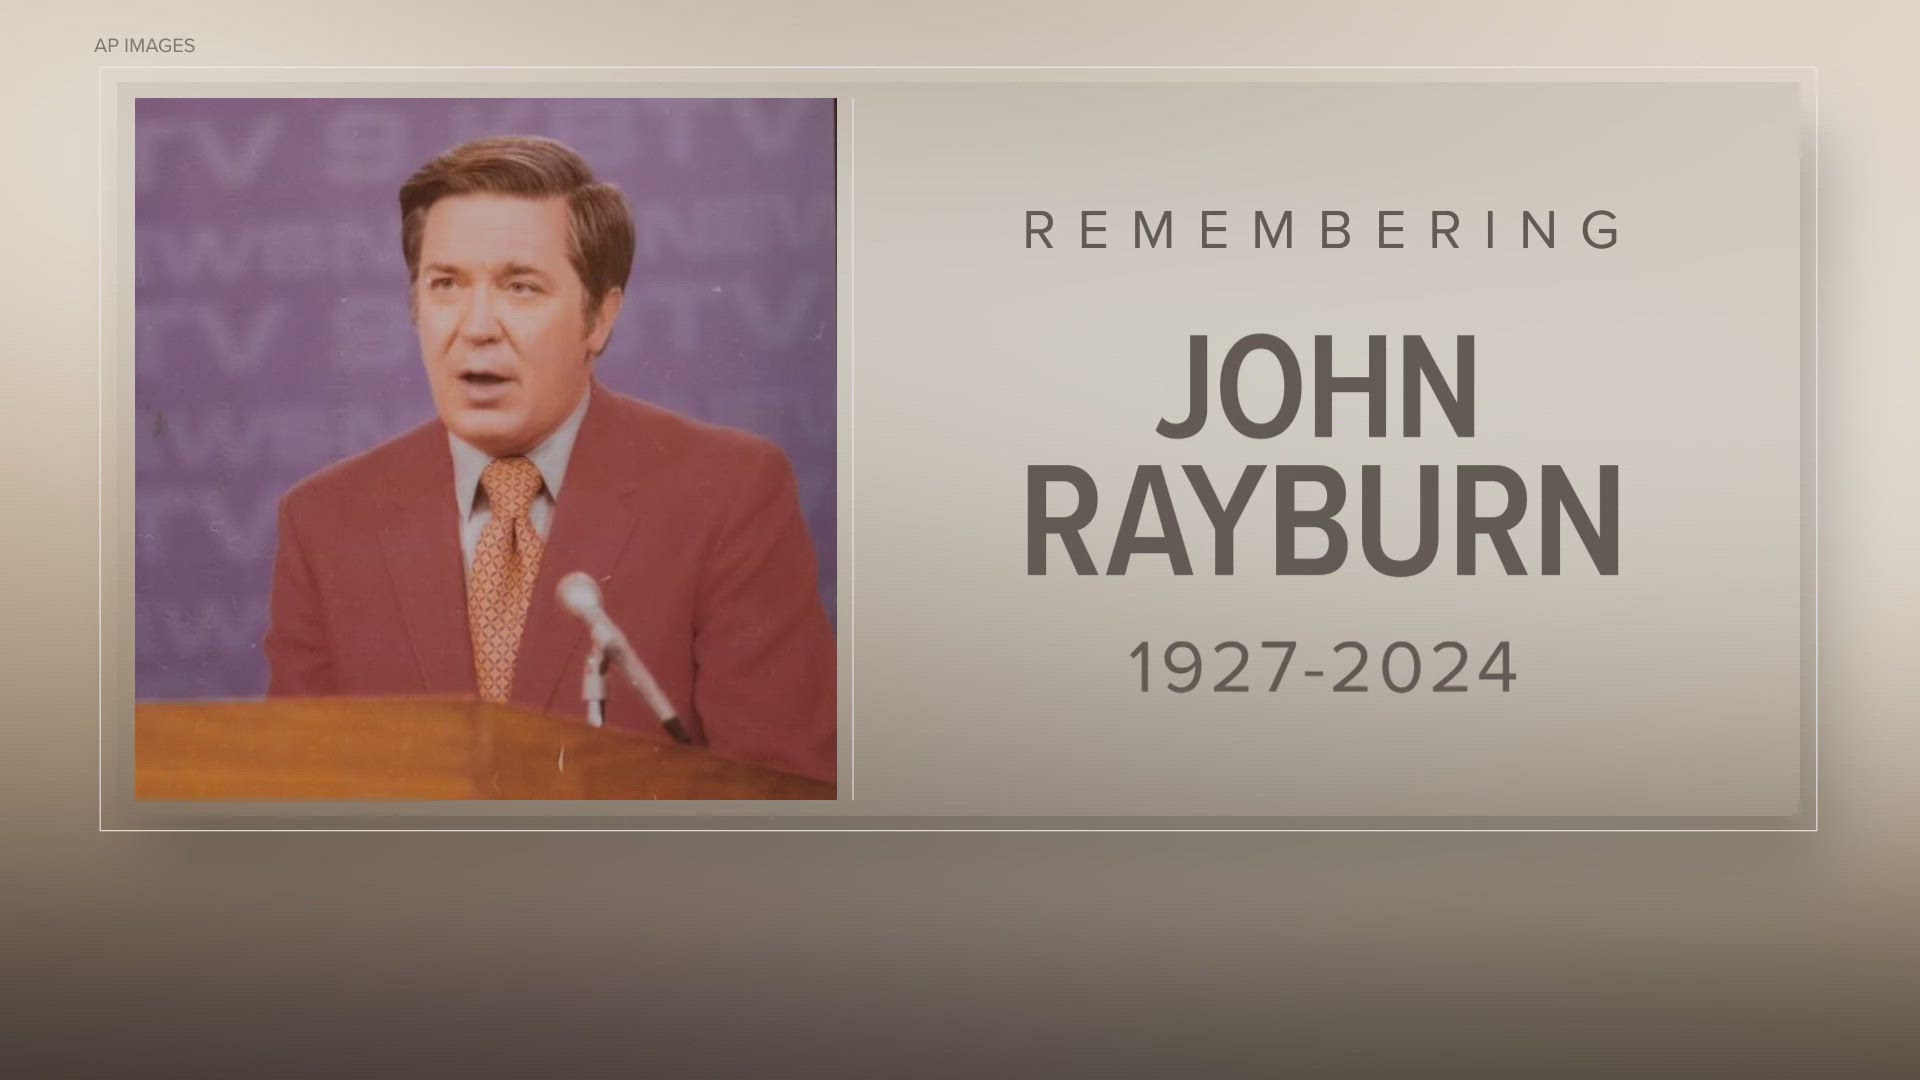 Rayburn was the only anchor who worked for all three Denver networks at that time, and he was famous for his closing: "May all your news be good news."